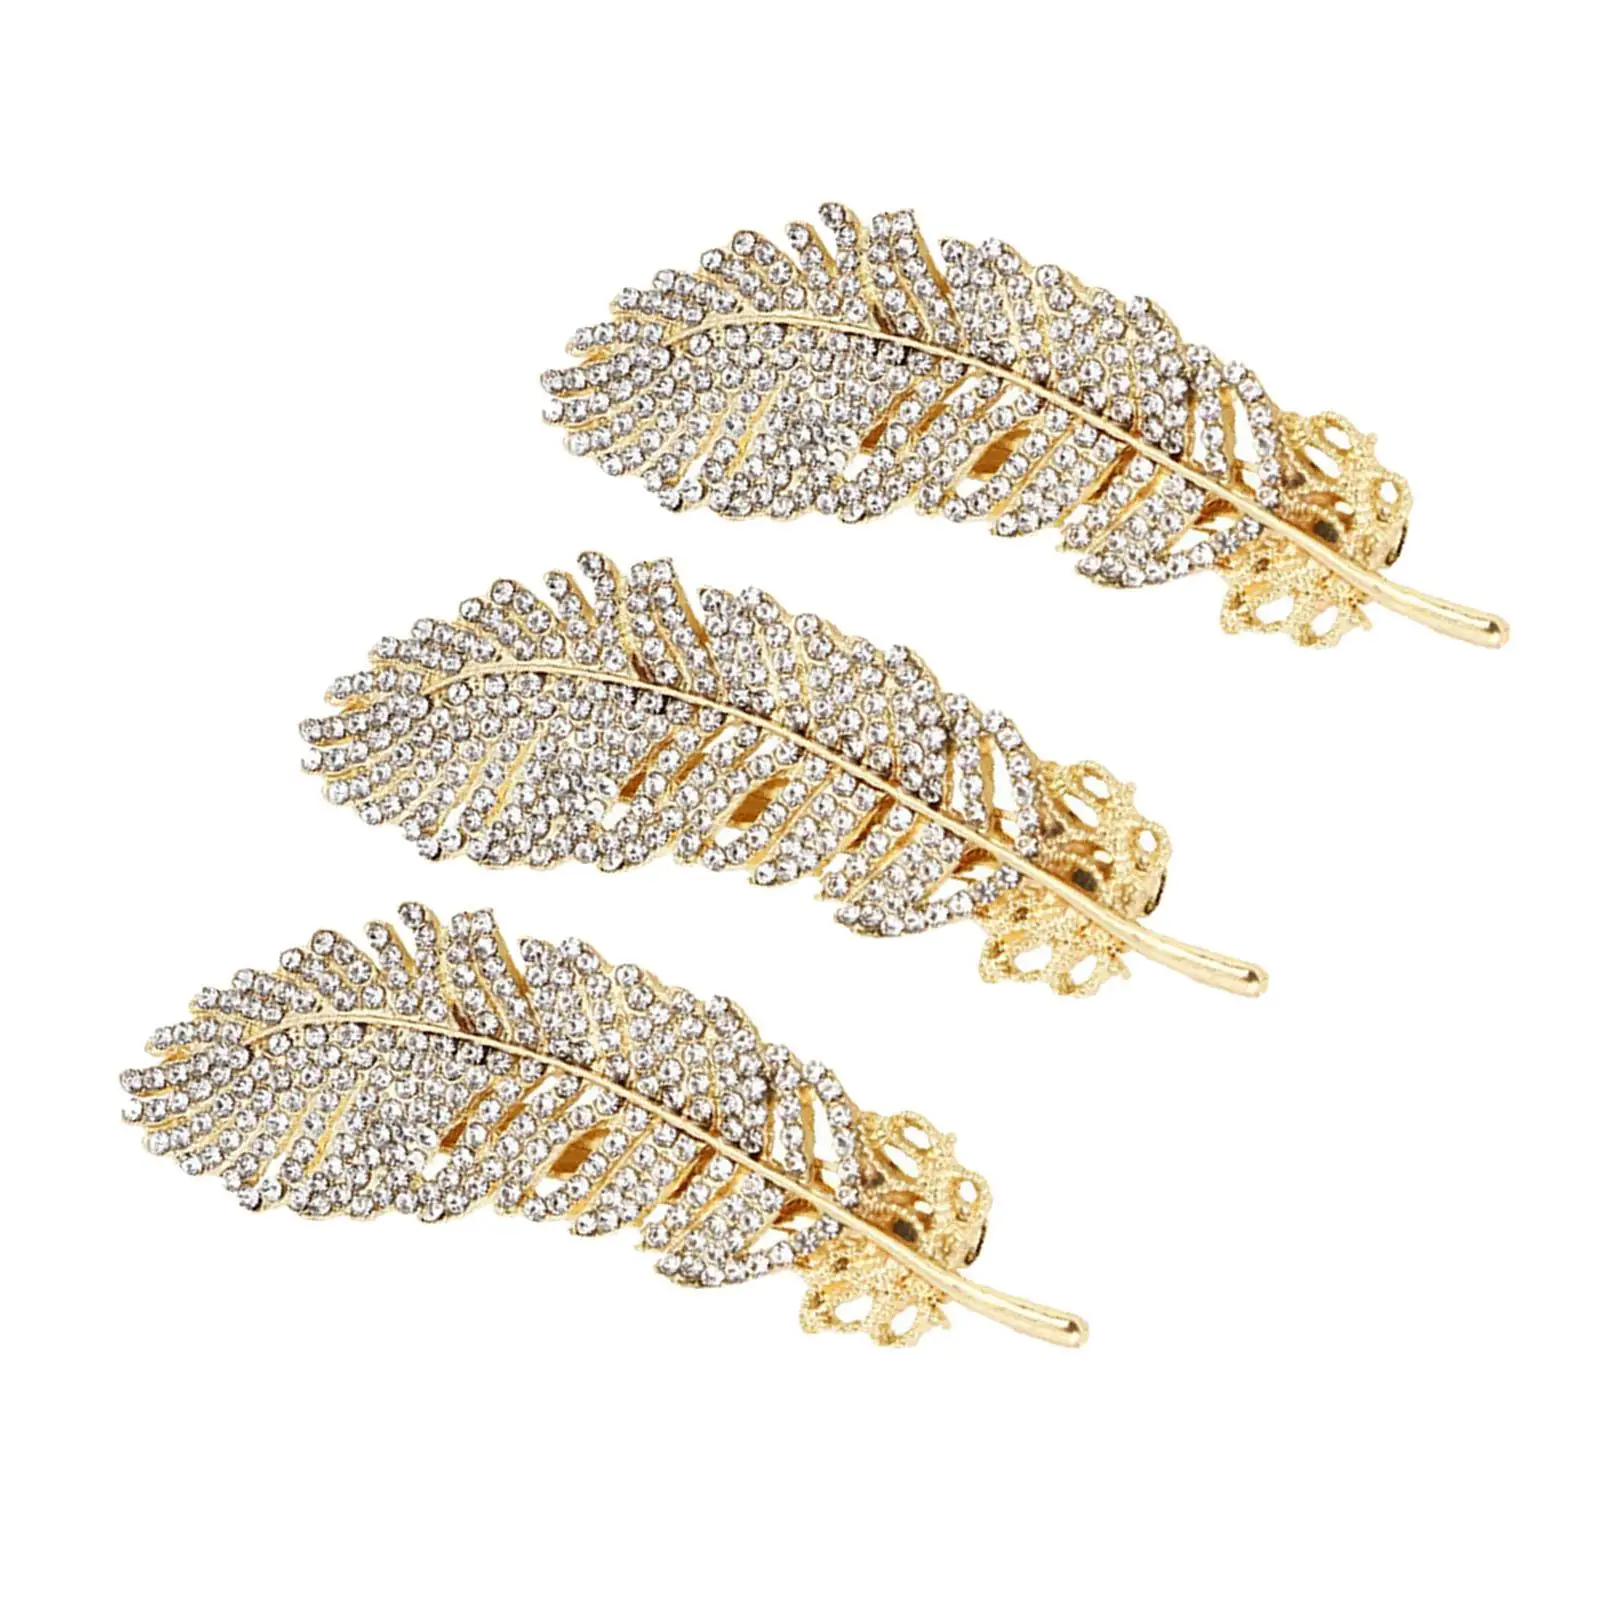 3 Pieces Luxury Hair Clips Metal Sparkling Hairpin Headdress jewelry for party Wedding gifts